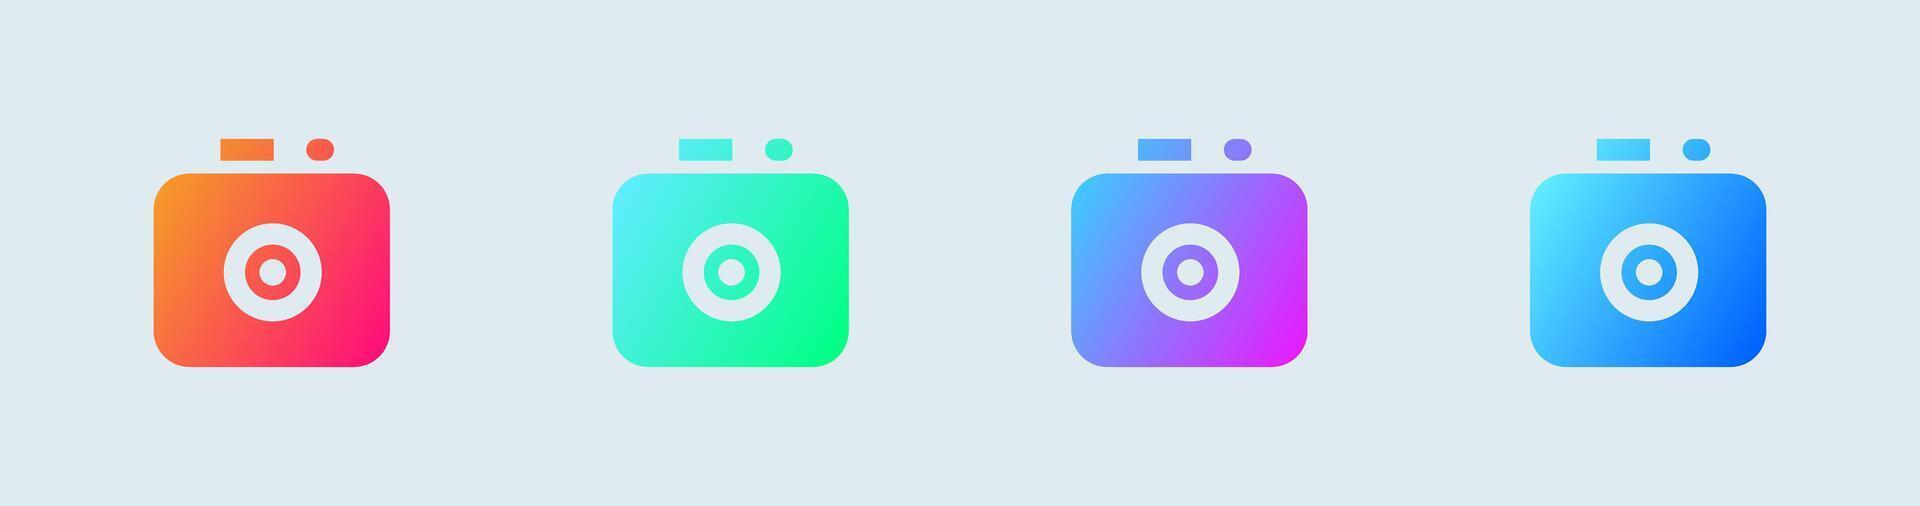 Camera solid icon in gradient colors. Capture buttons signs vector illustration.